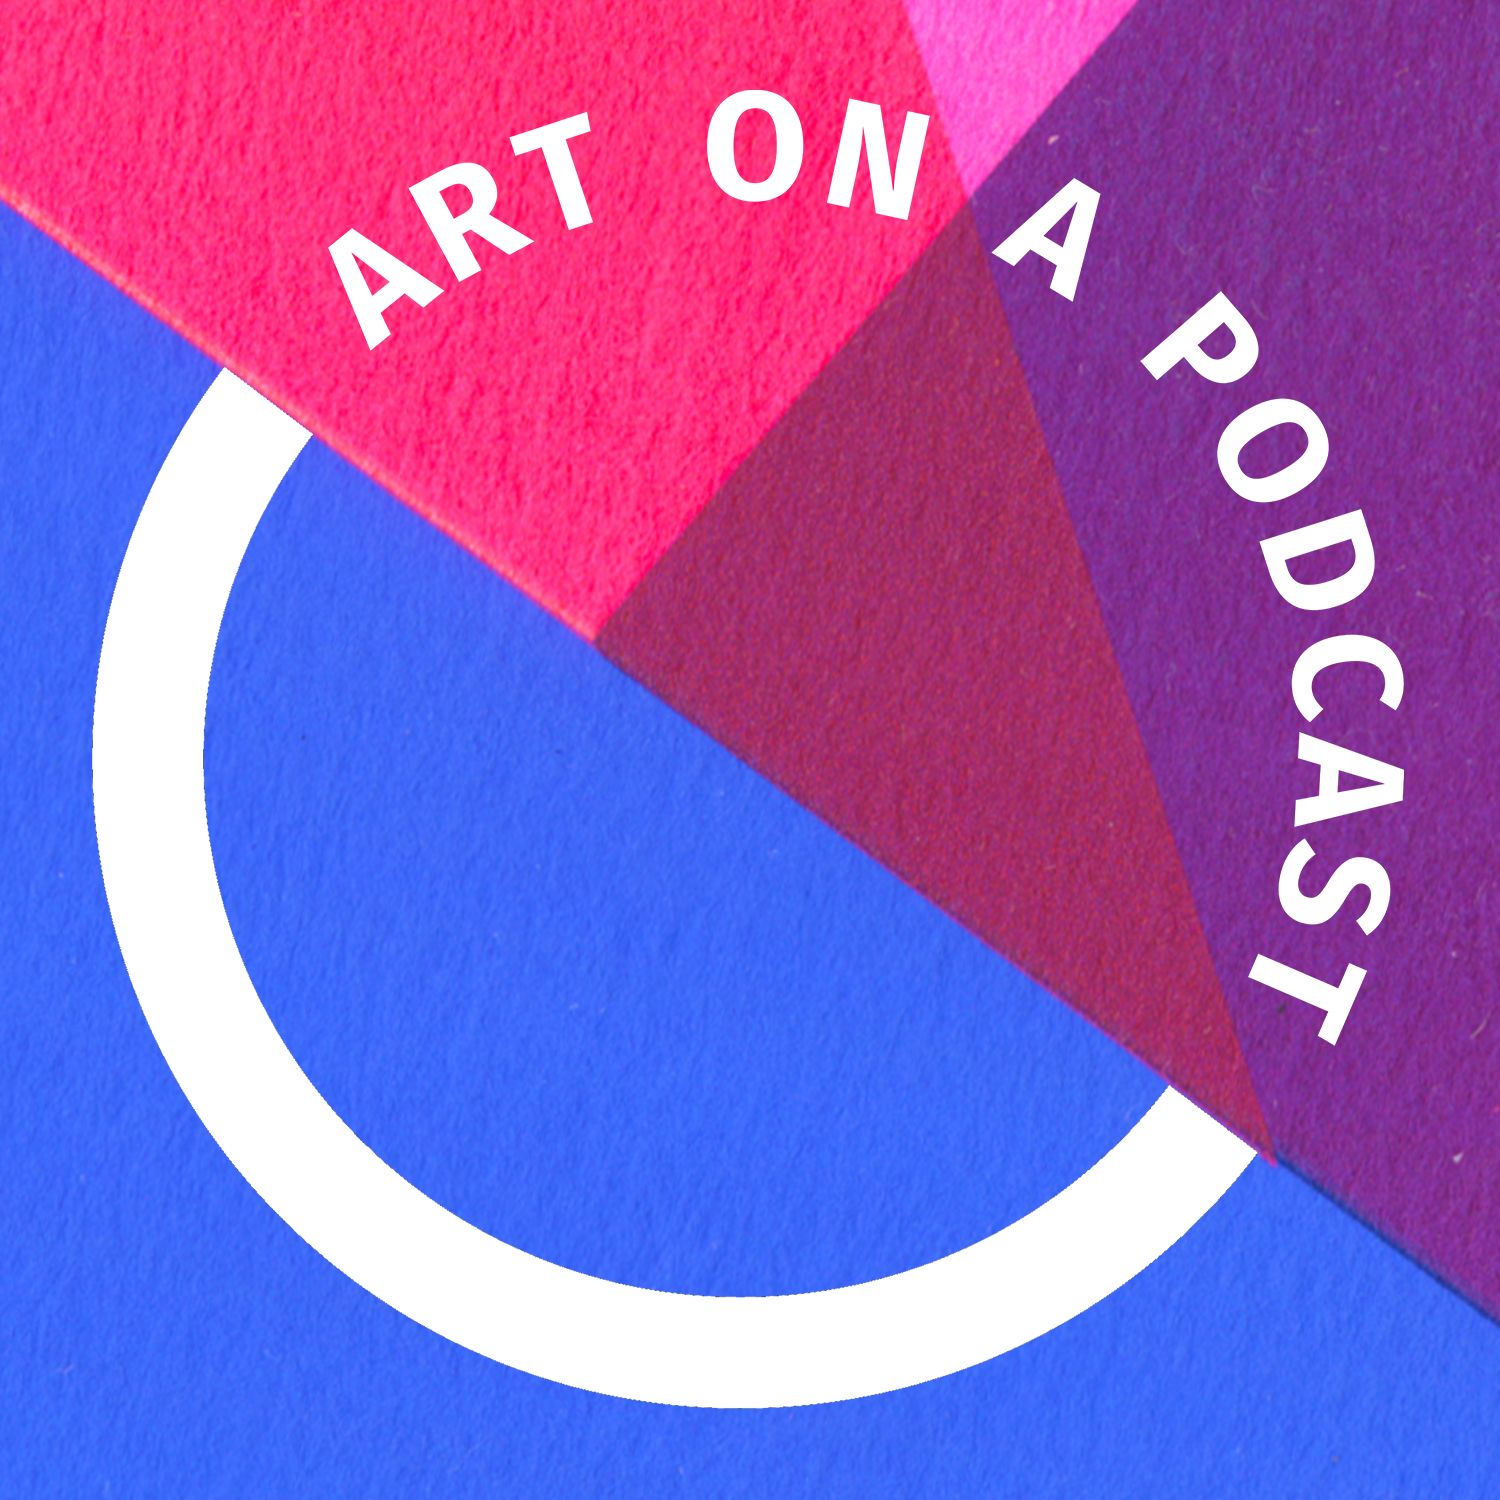 Art on a Podcast podcast show image